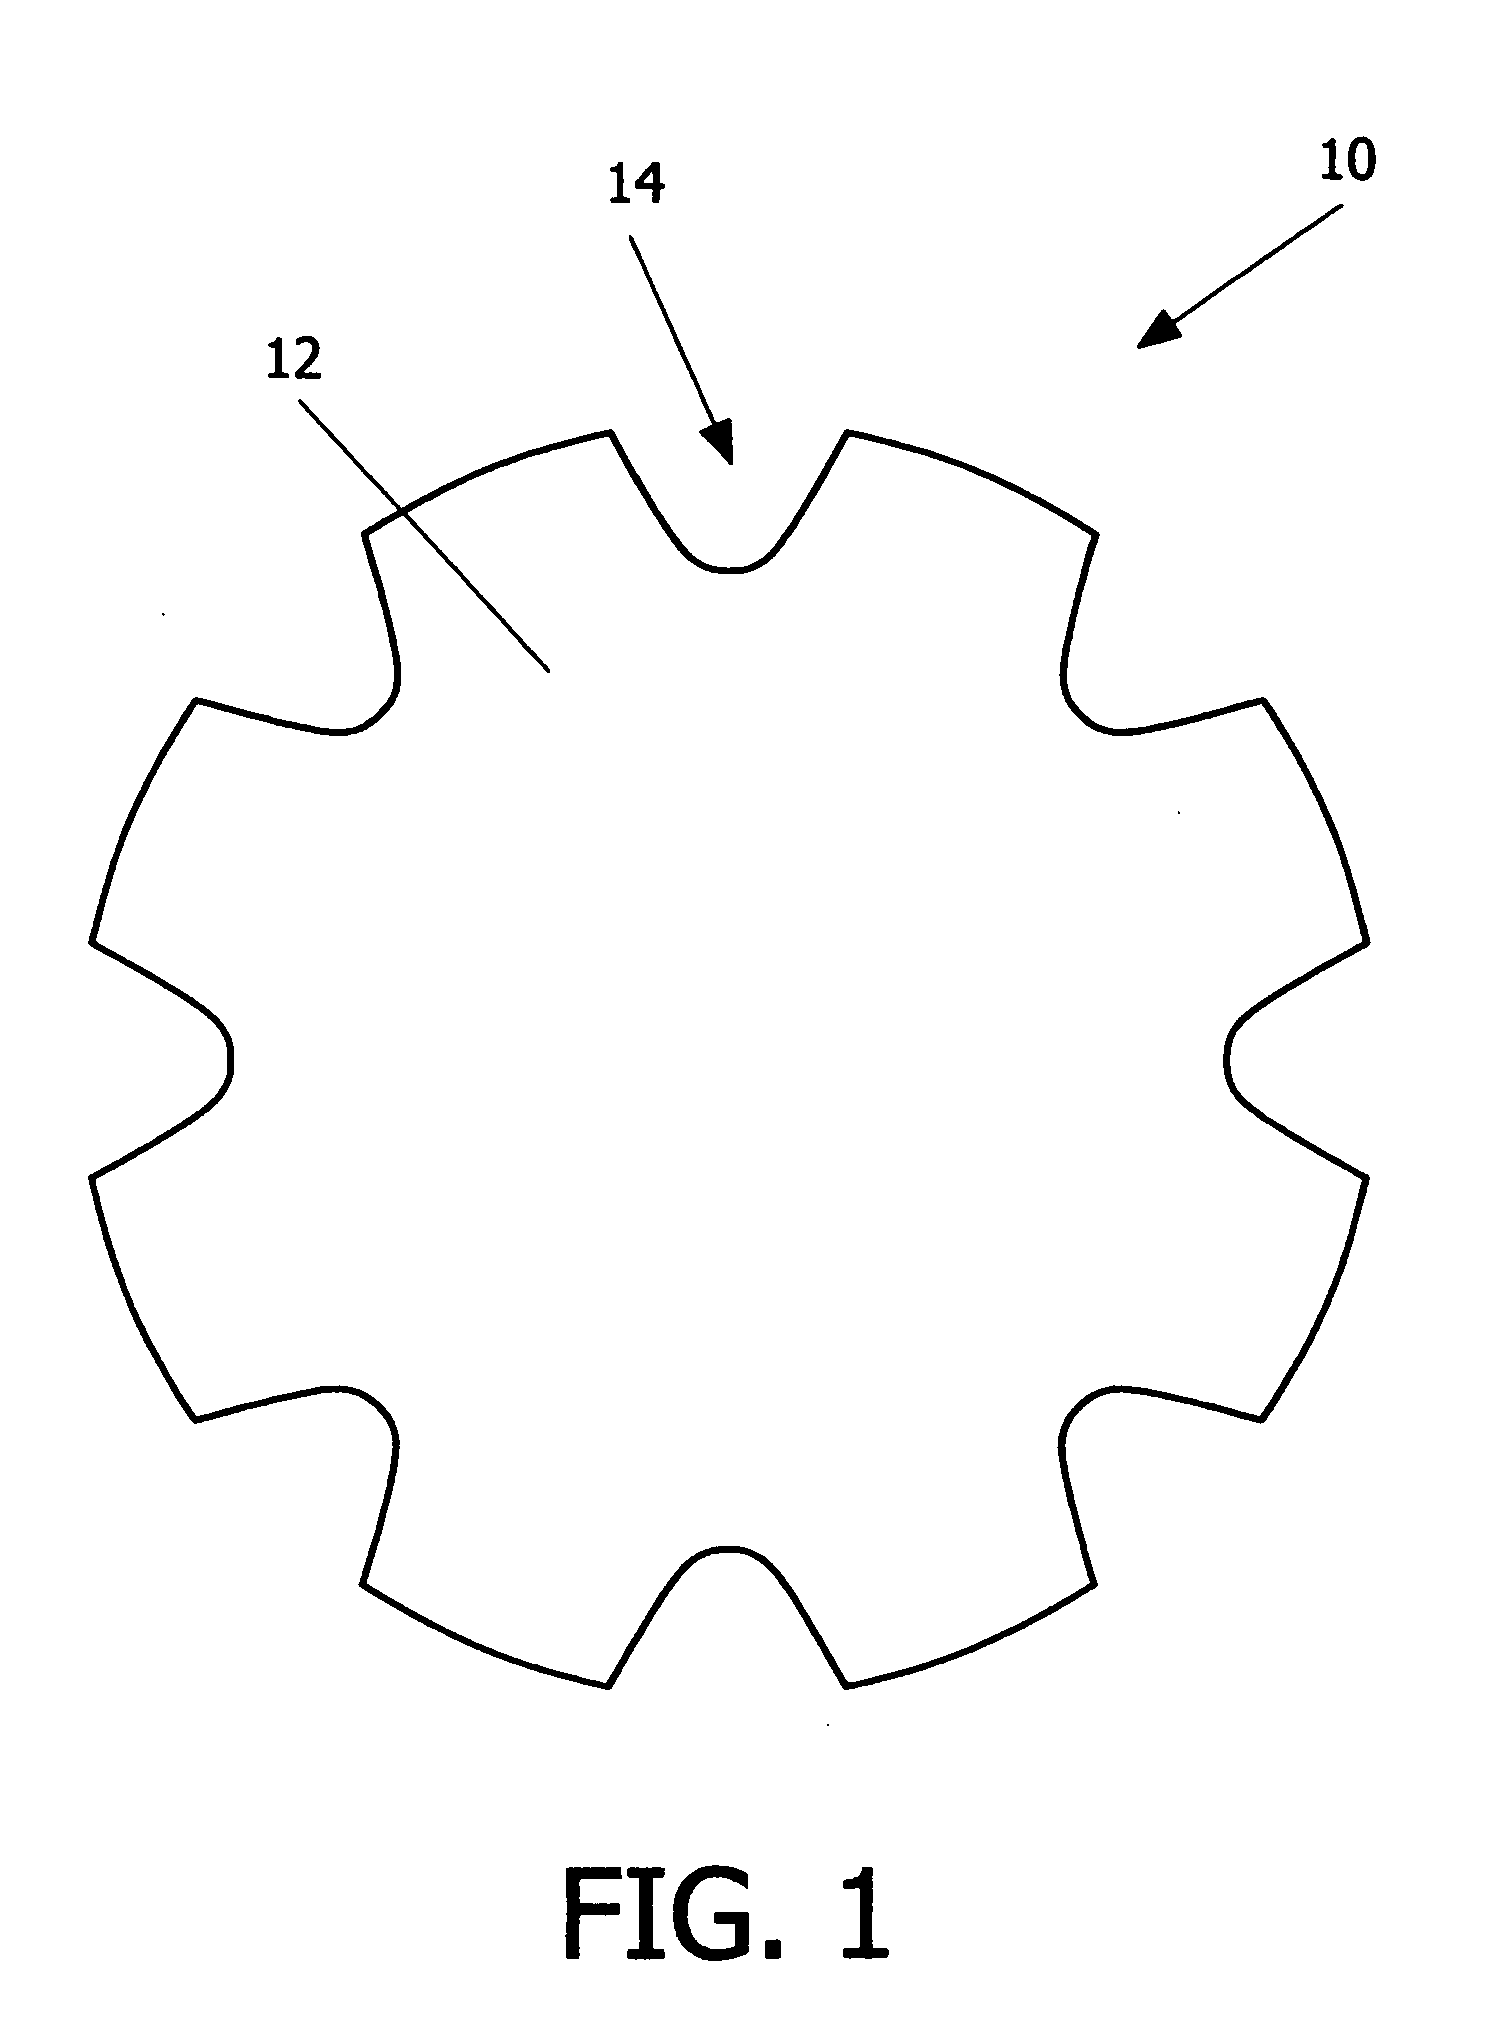 Indexable cutting inserts and methods for producing the same